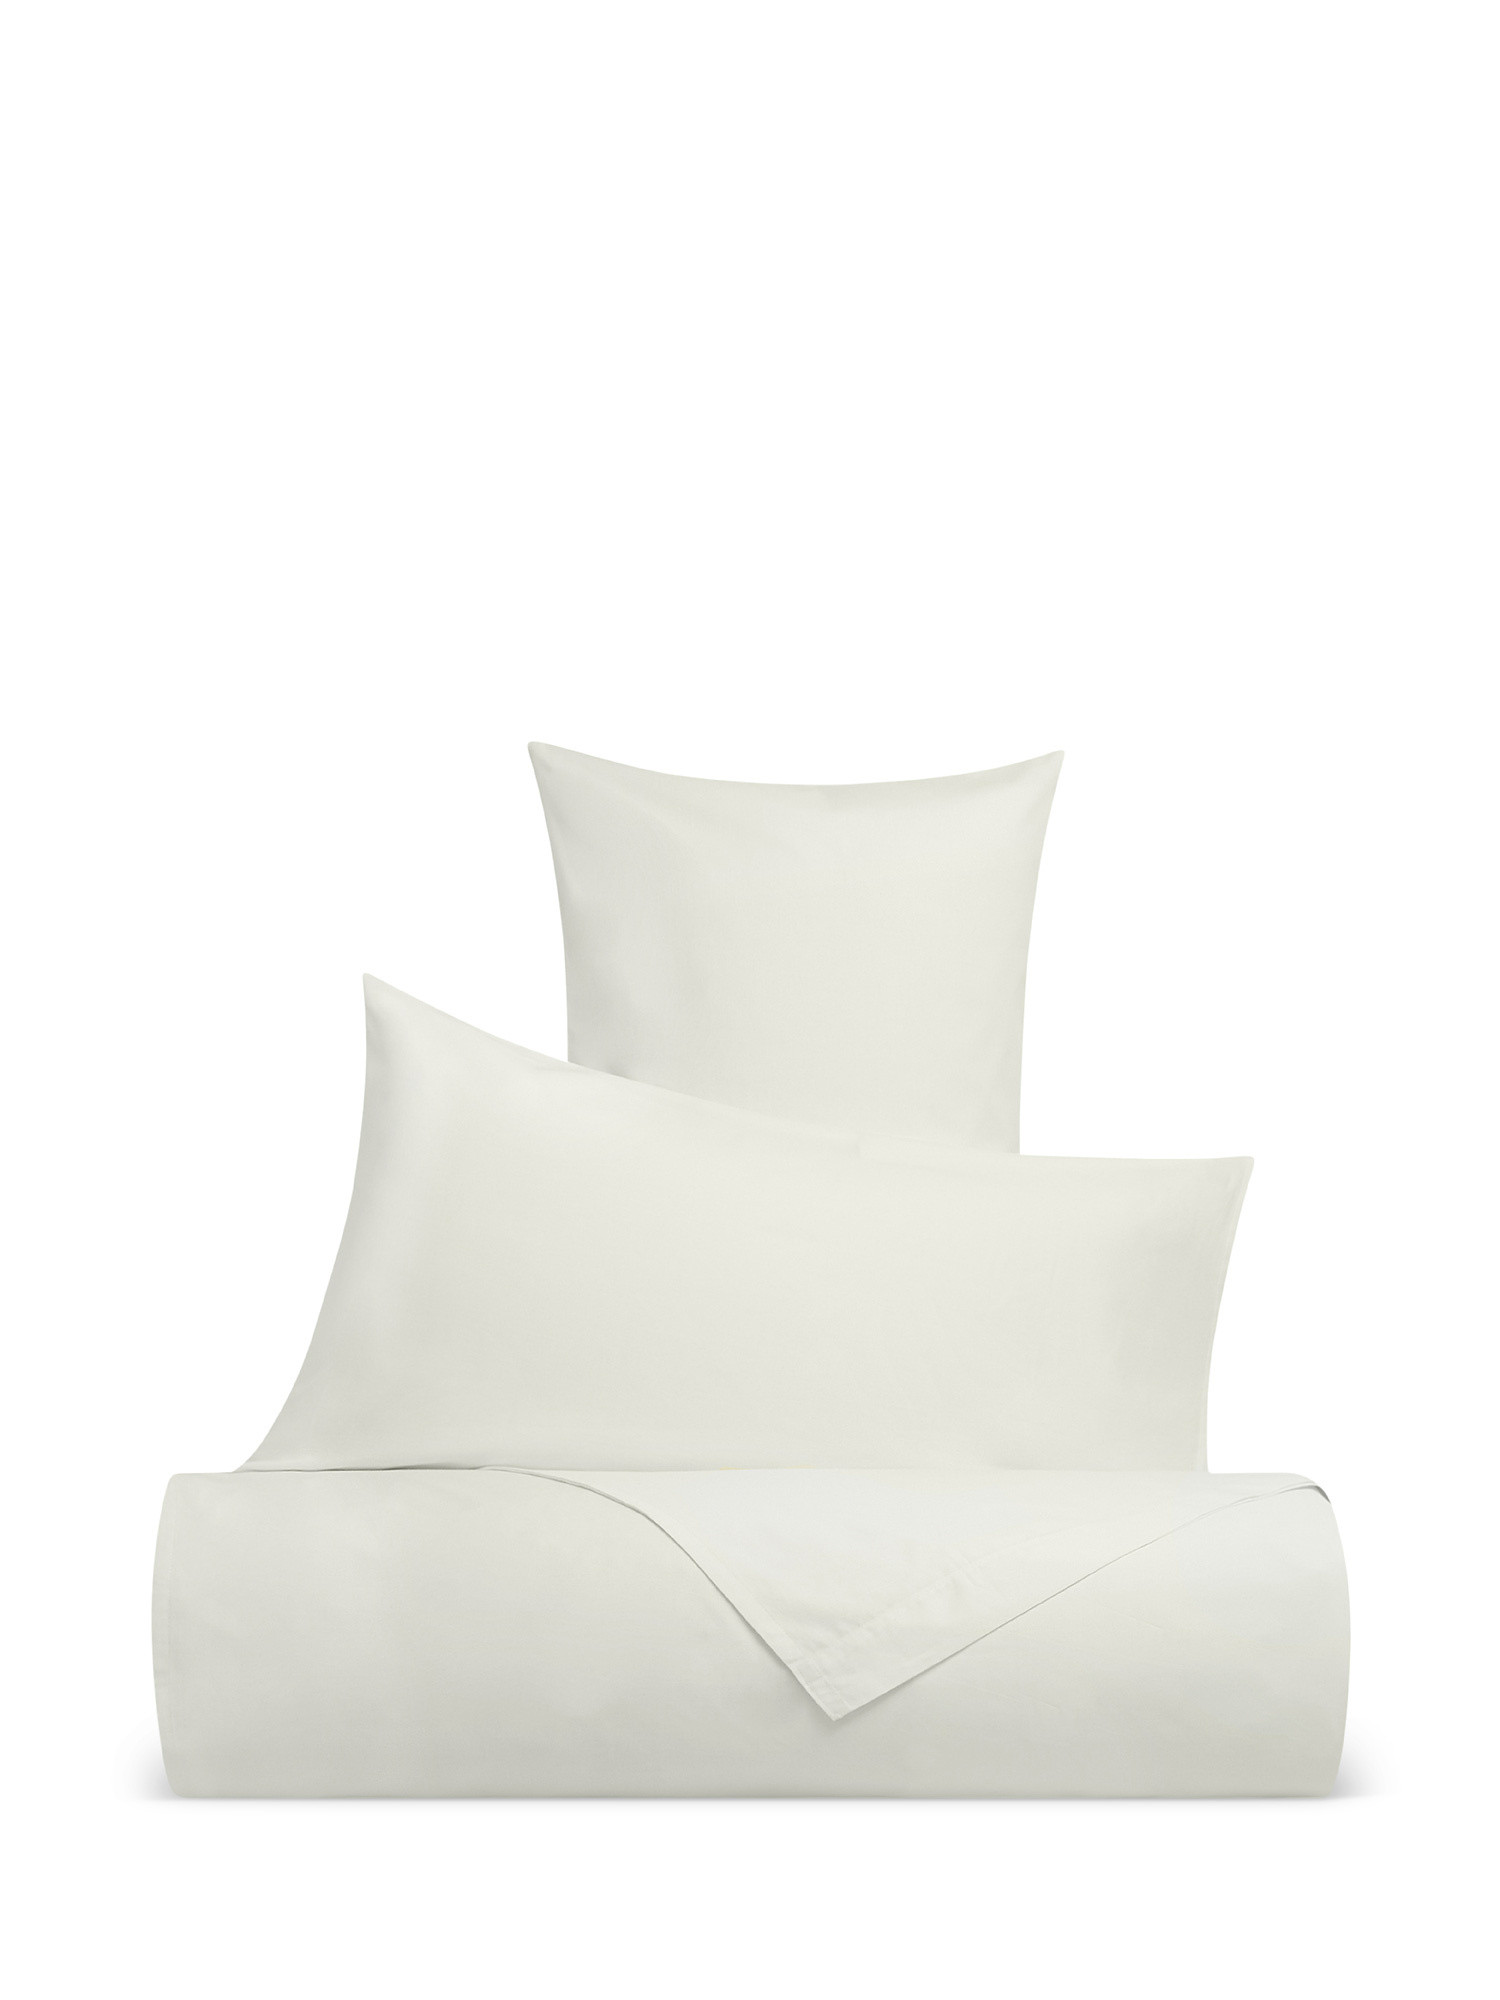 Solid color cotton percale sheet set, White, large image number 0